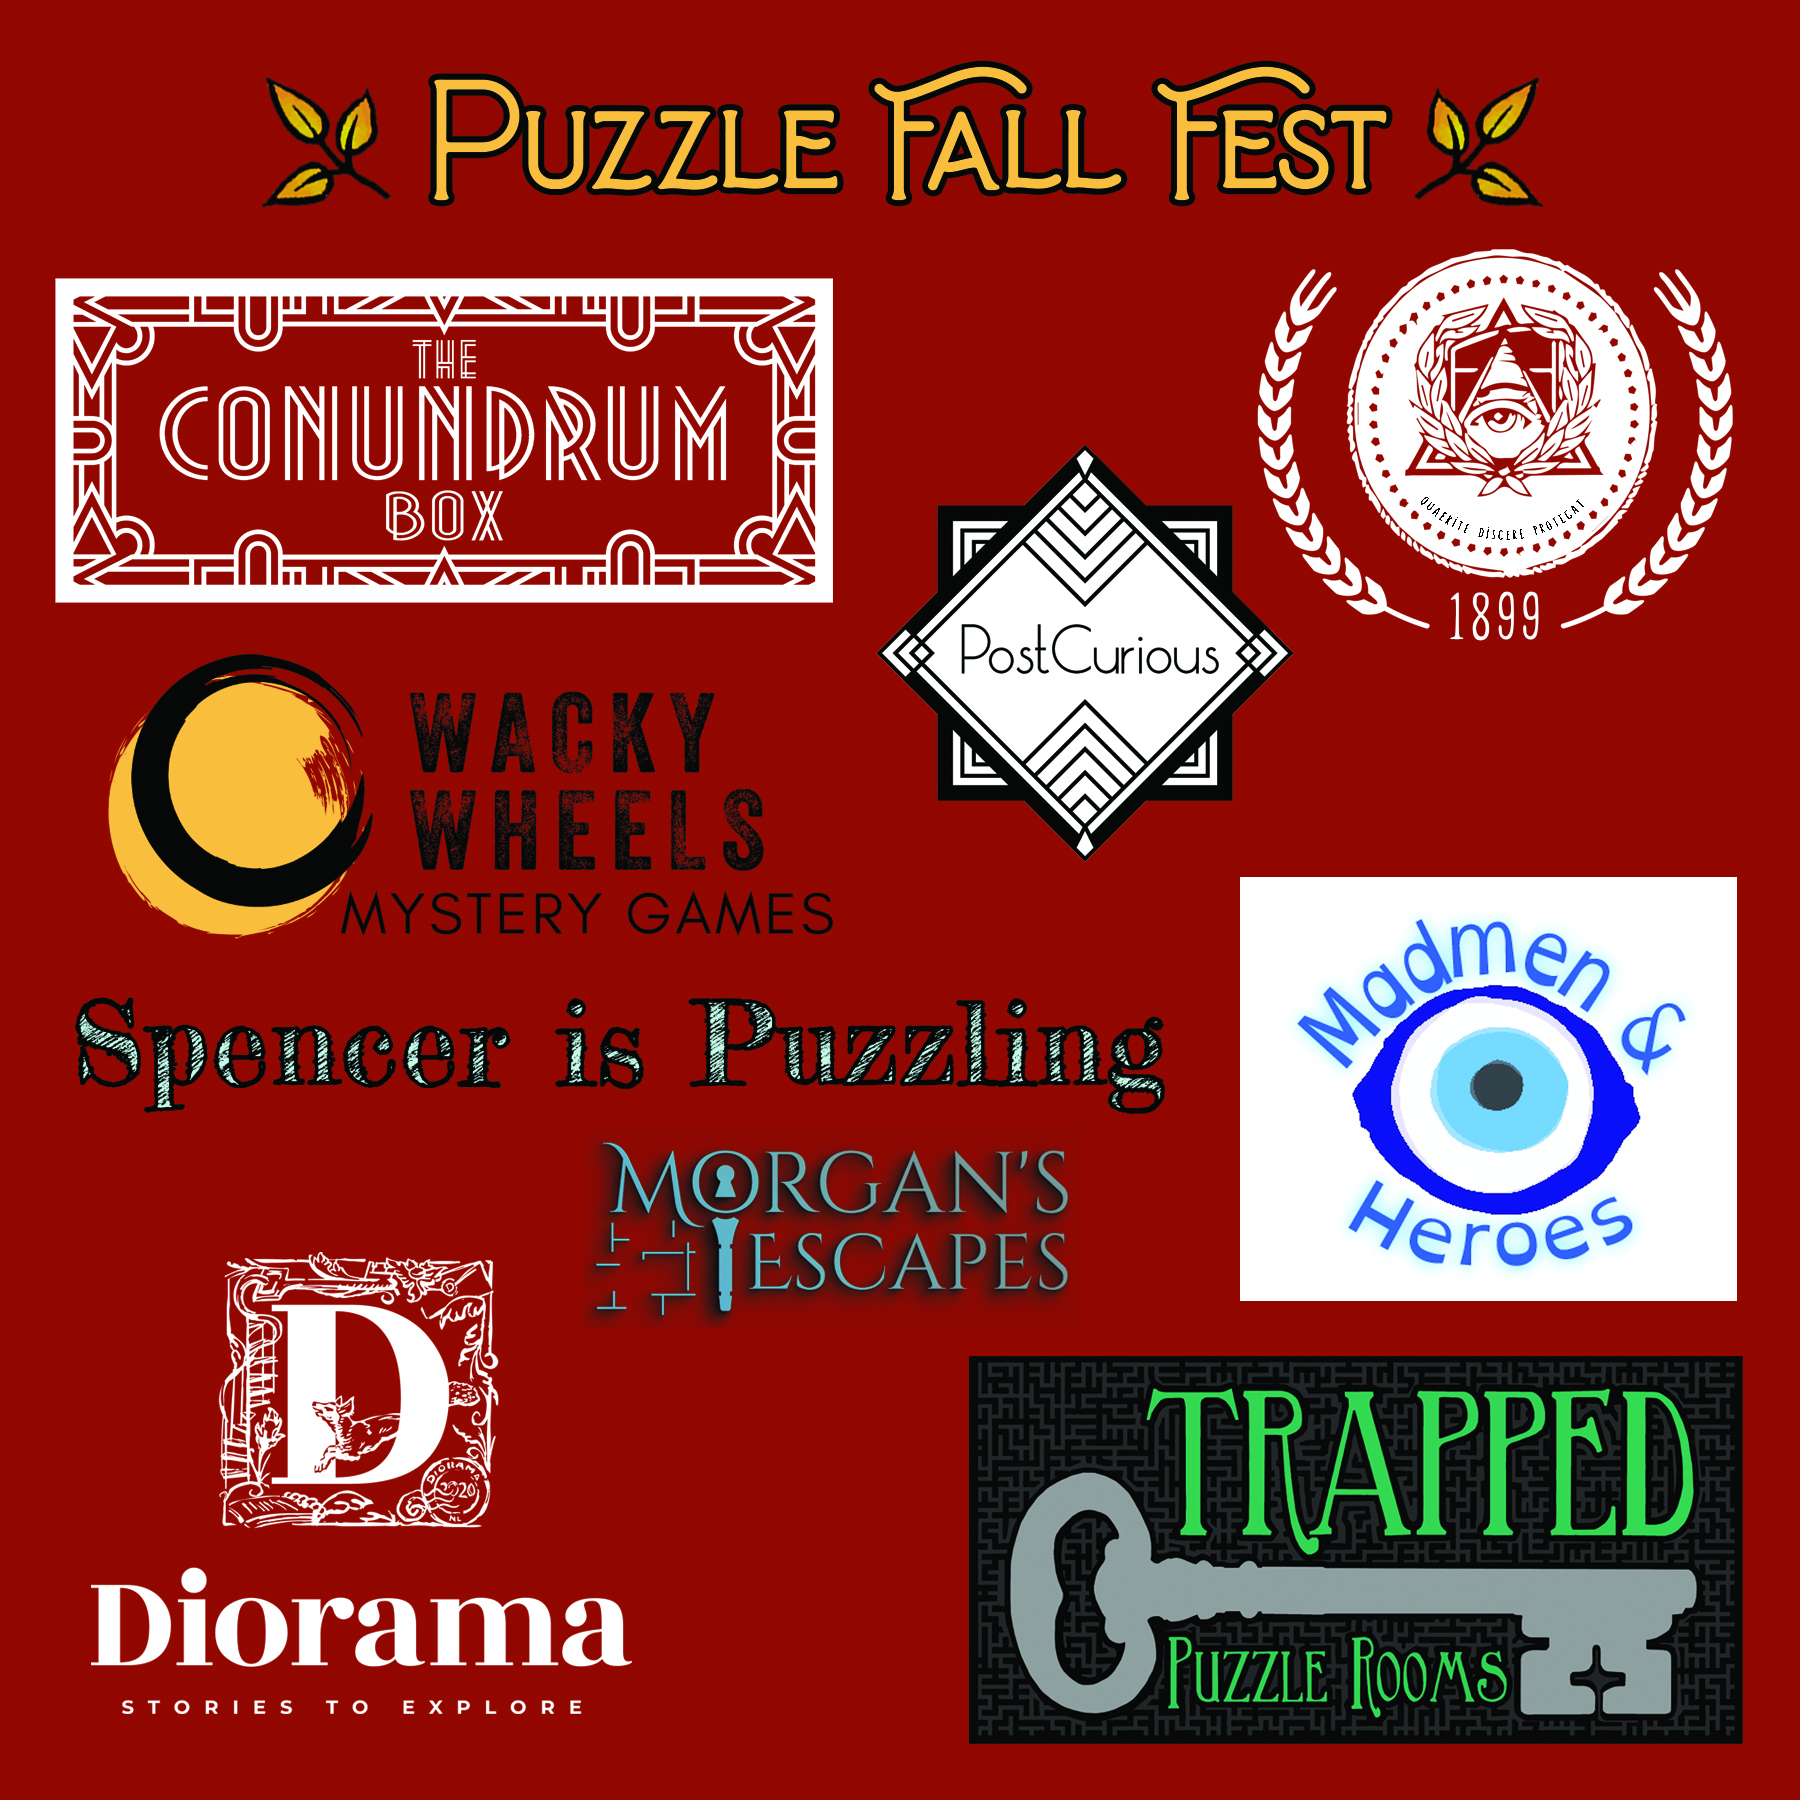 PUZZLE FALL FEST